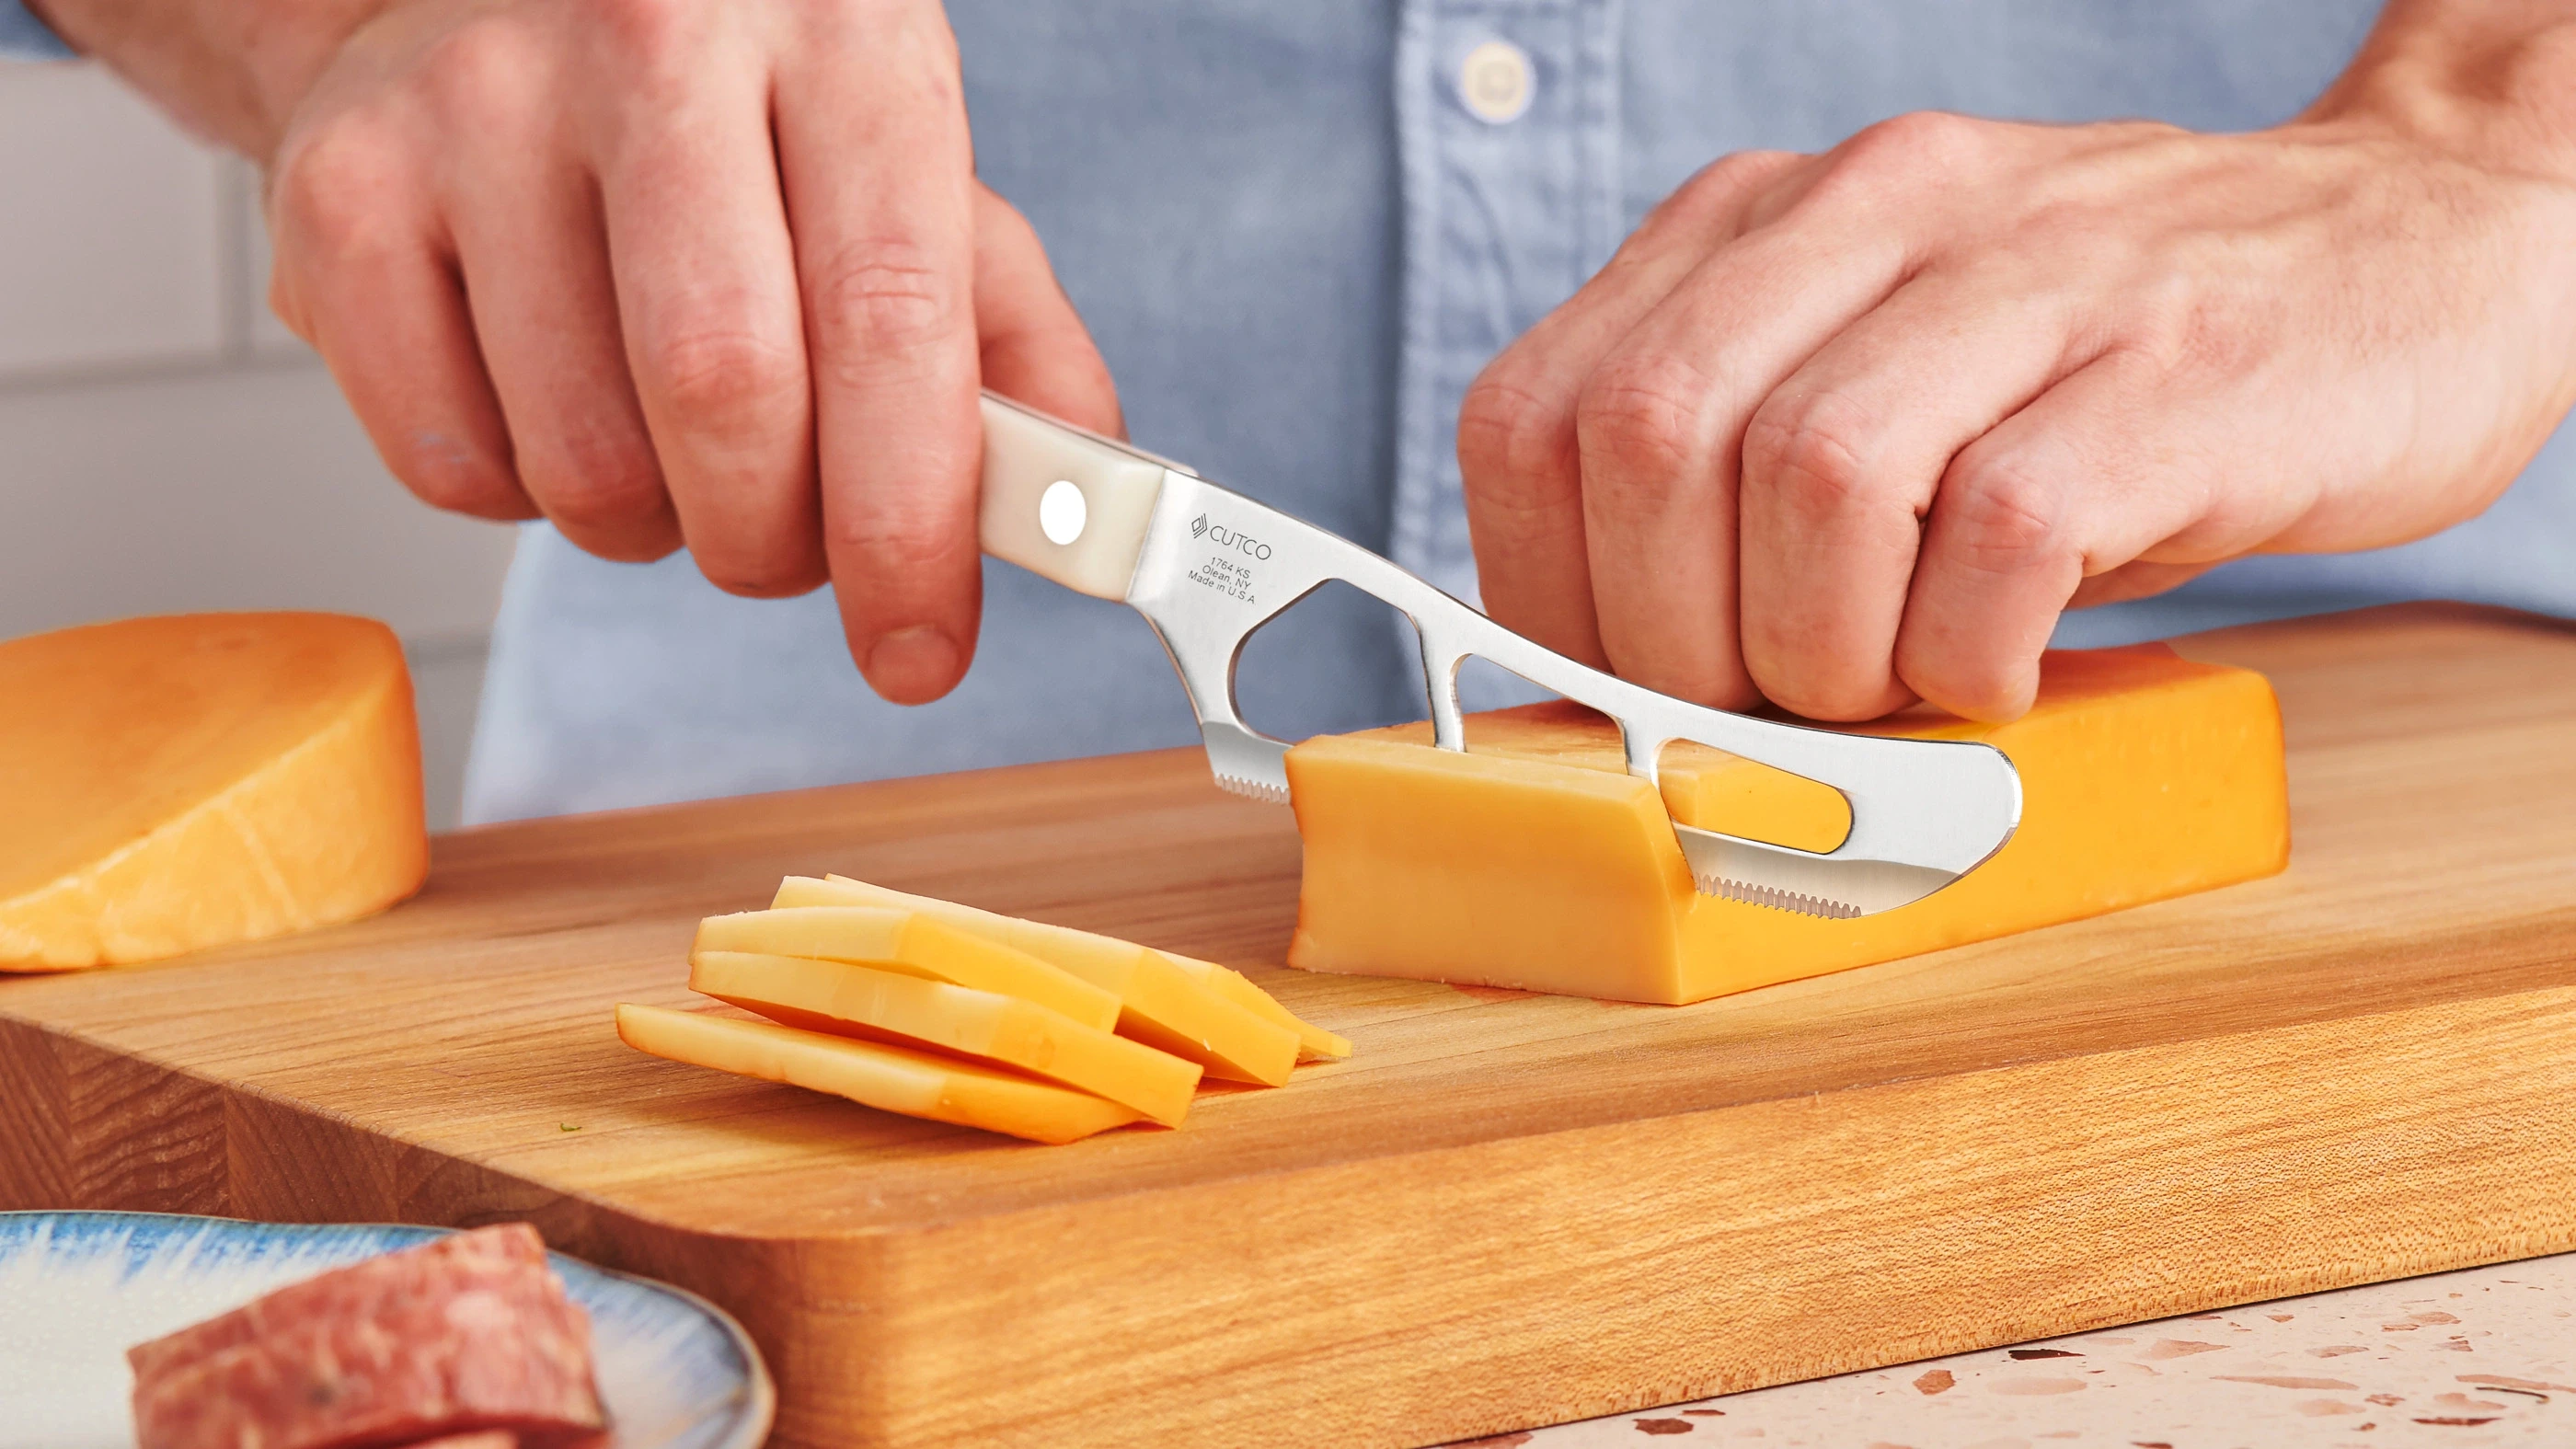 Model 1764 CUTCO Traditional Cheese Knives with 5.5 Micro-D serrated edge